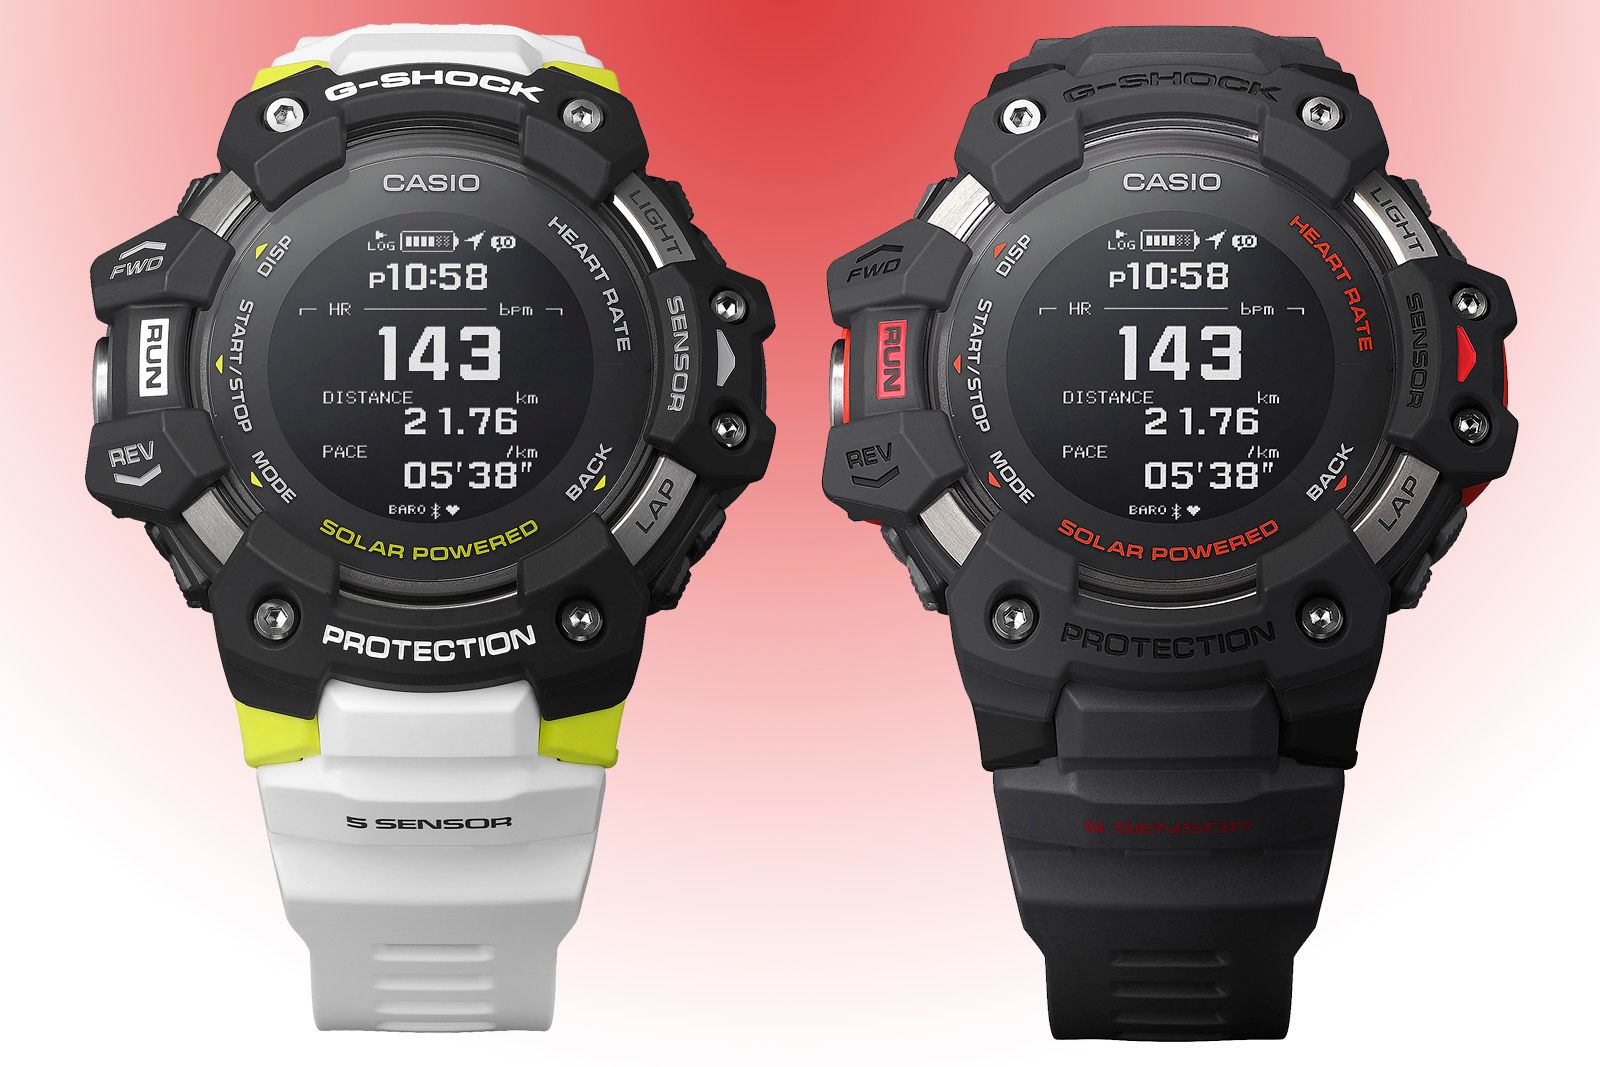 Casio G-shock Gbd-h1000 Smartwatch Comes With Hr Monitor And Gps image 1